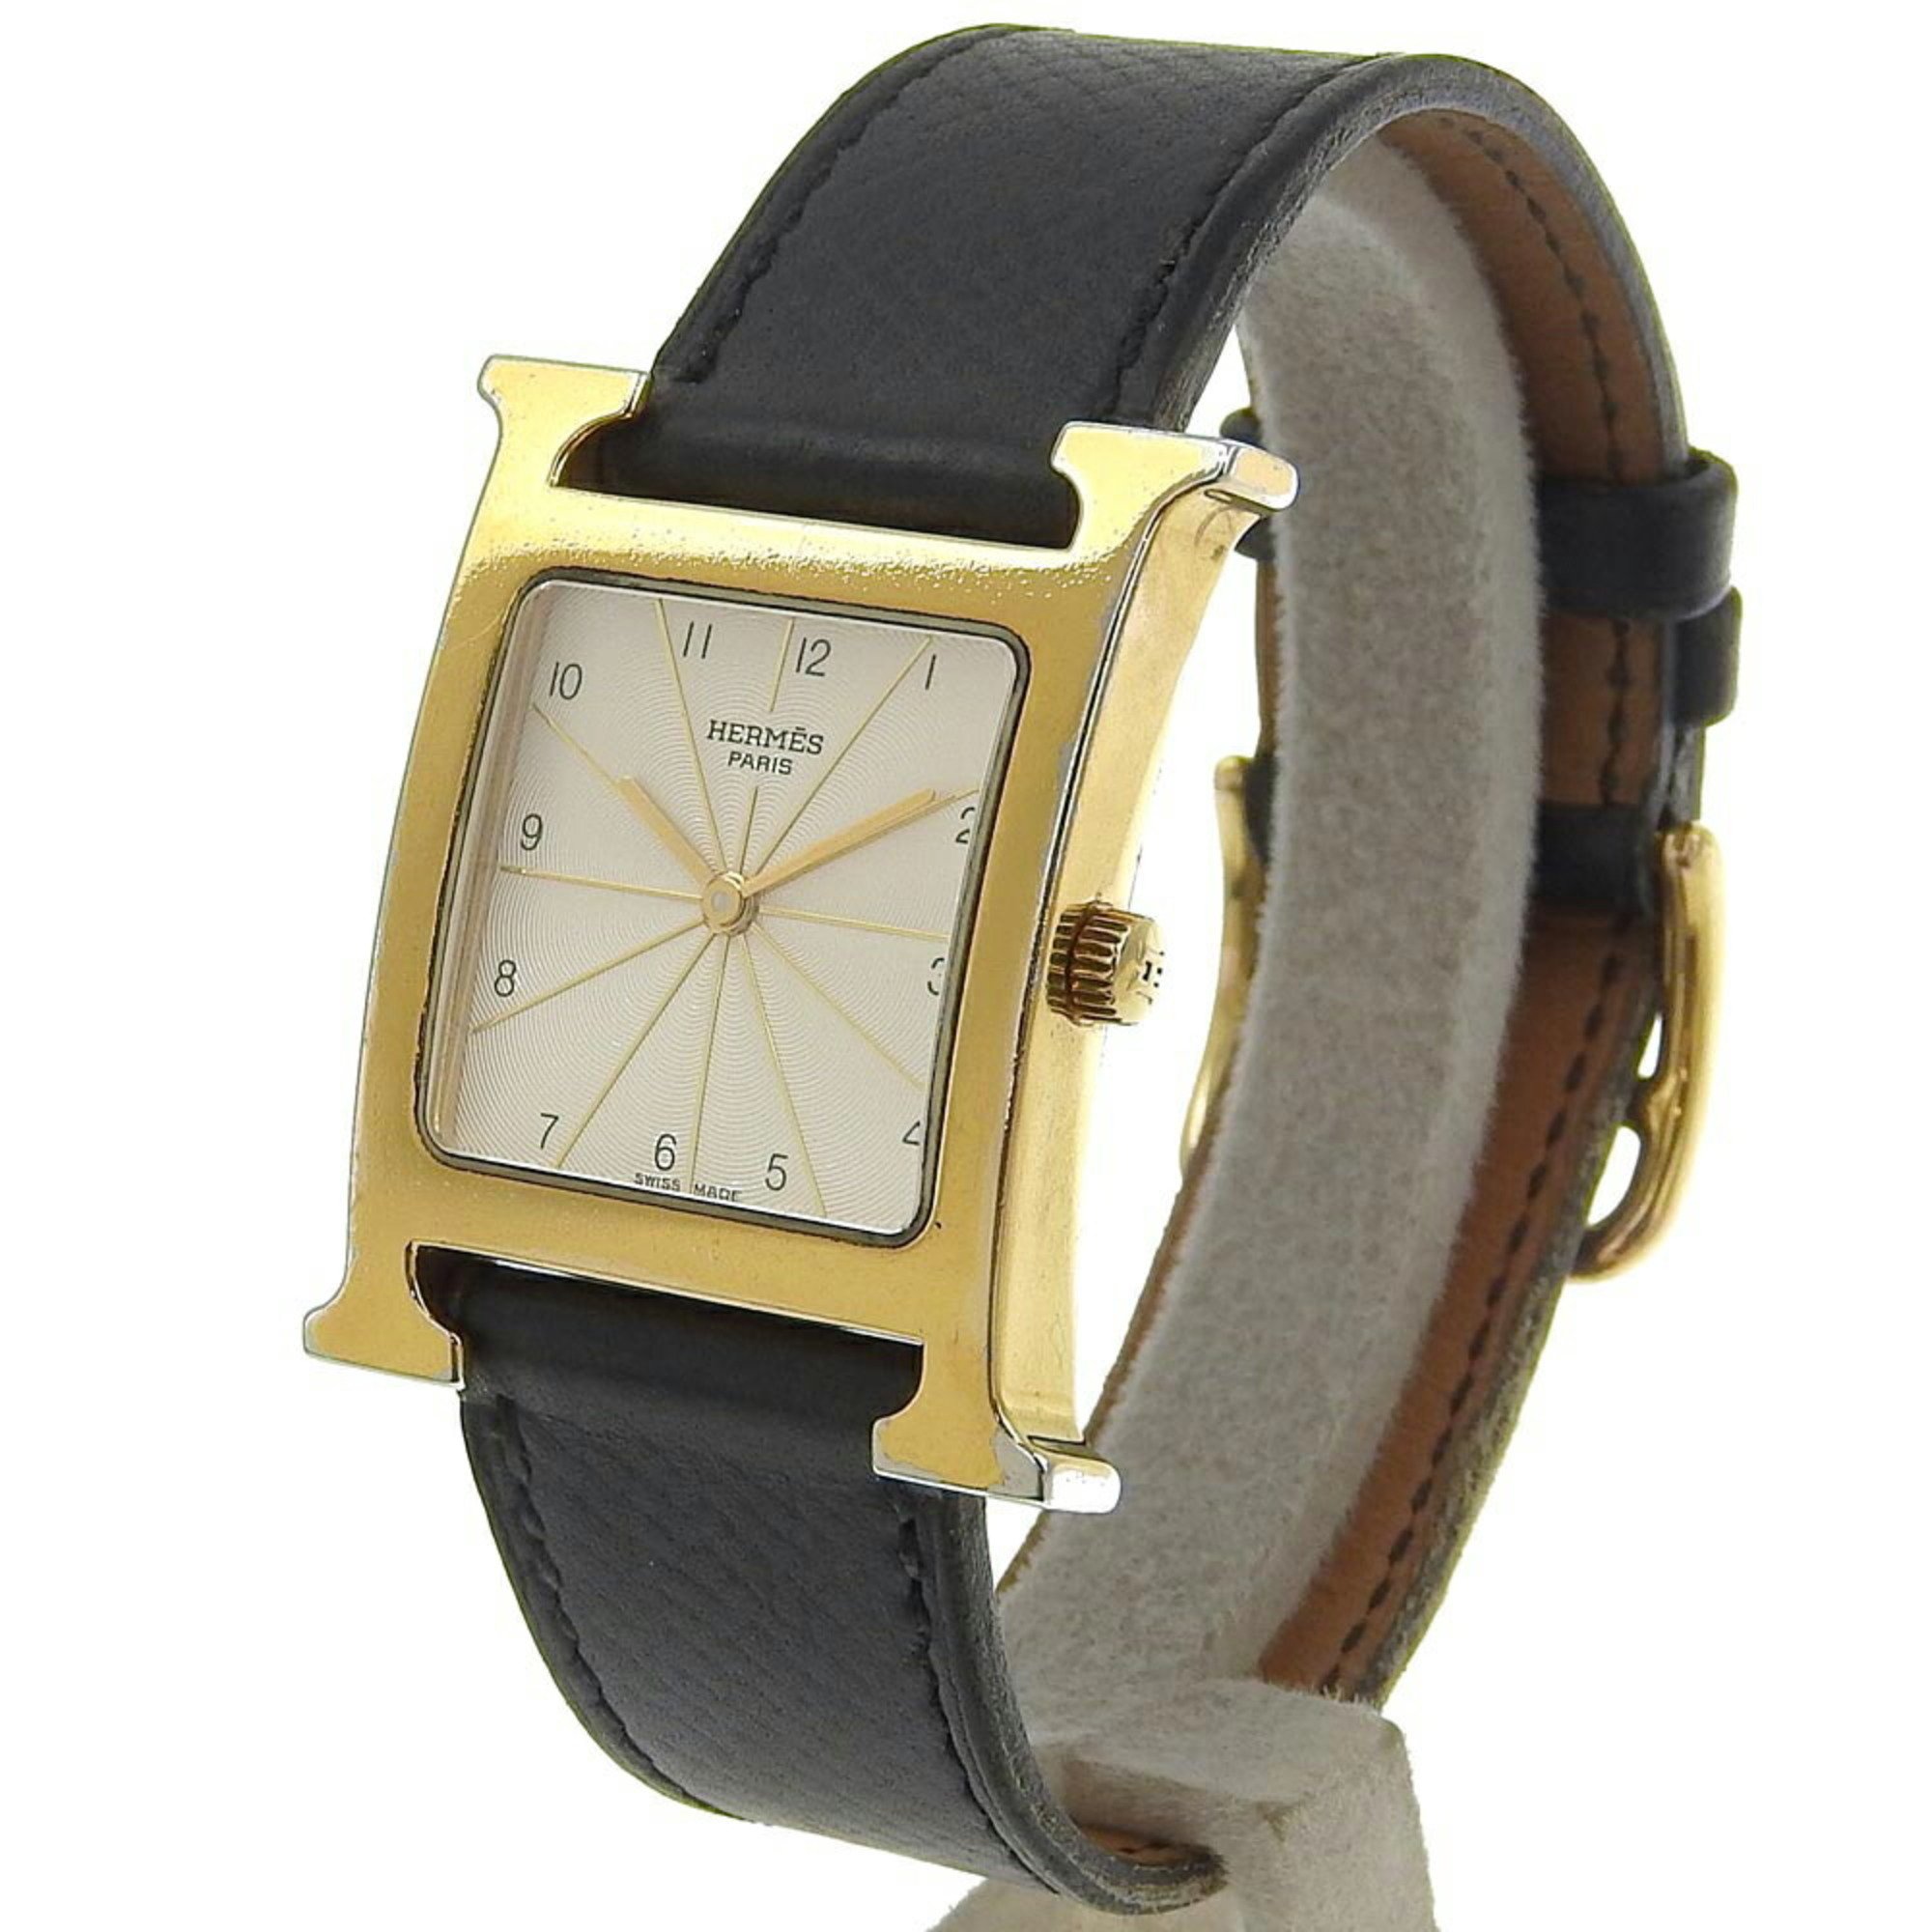 Hermes H watch HH1.501 gold plated quartz analog display white dial ladies I213023017